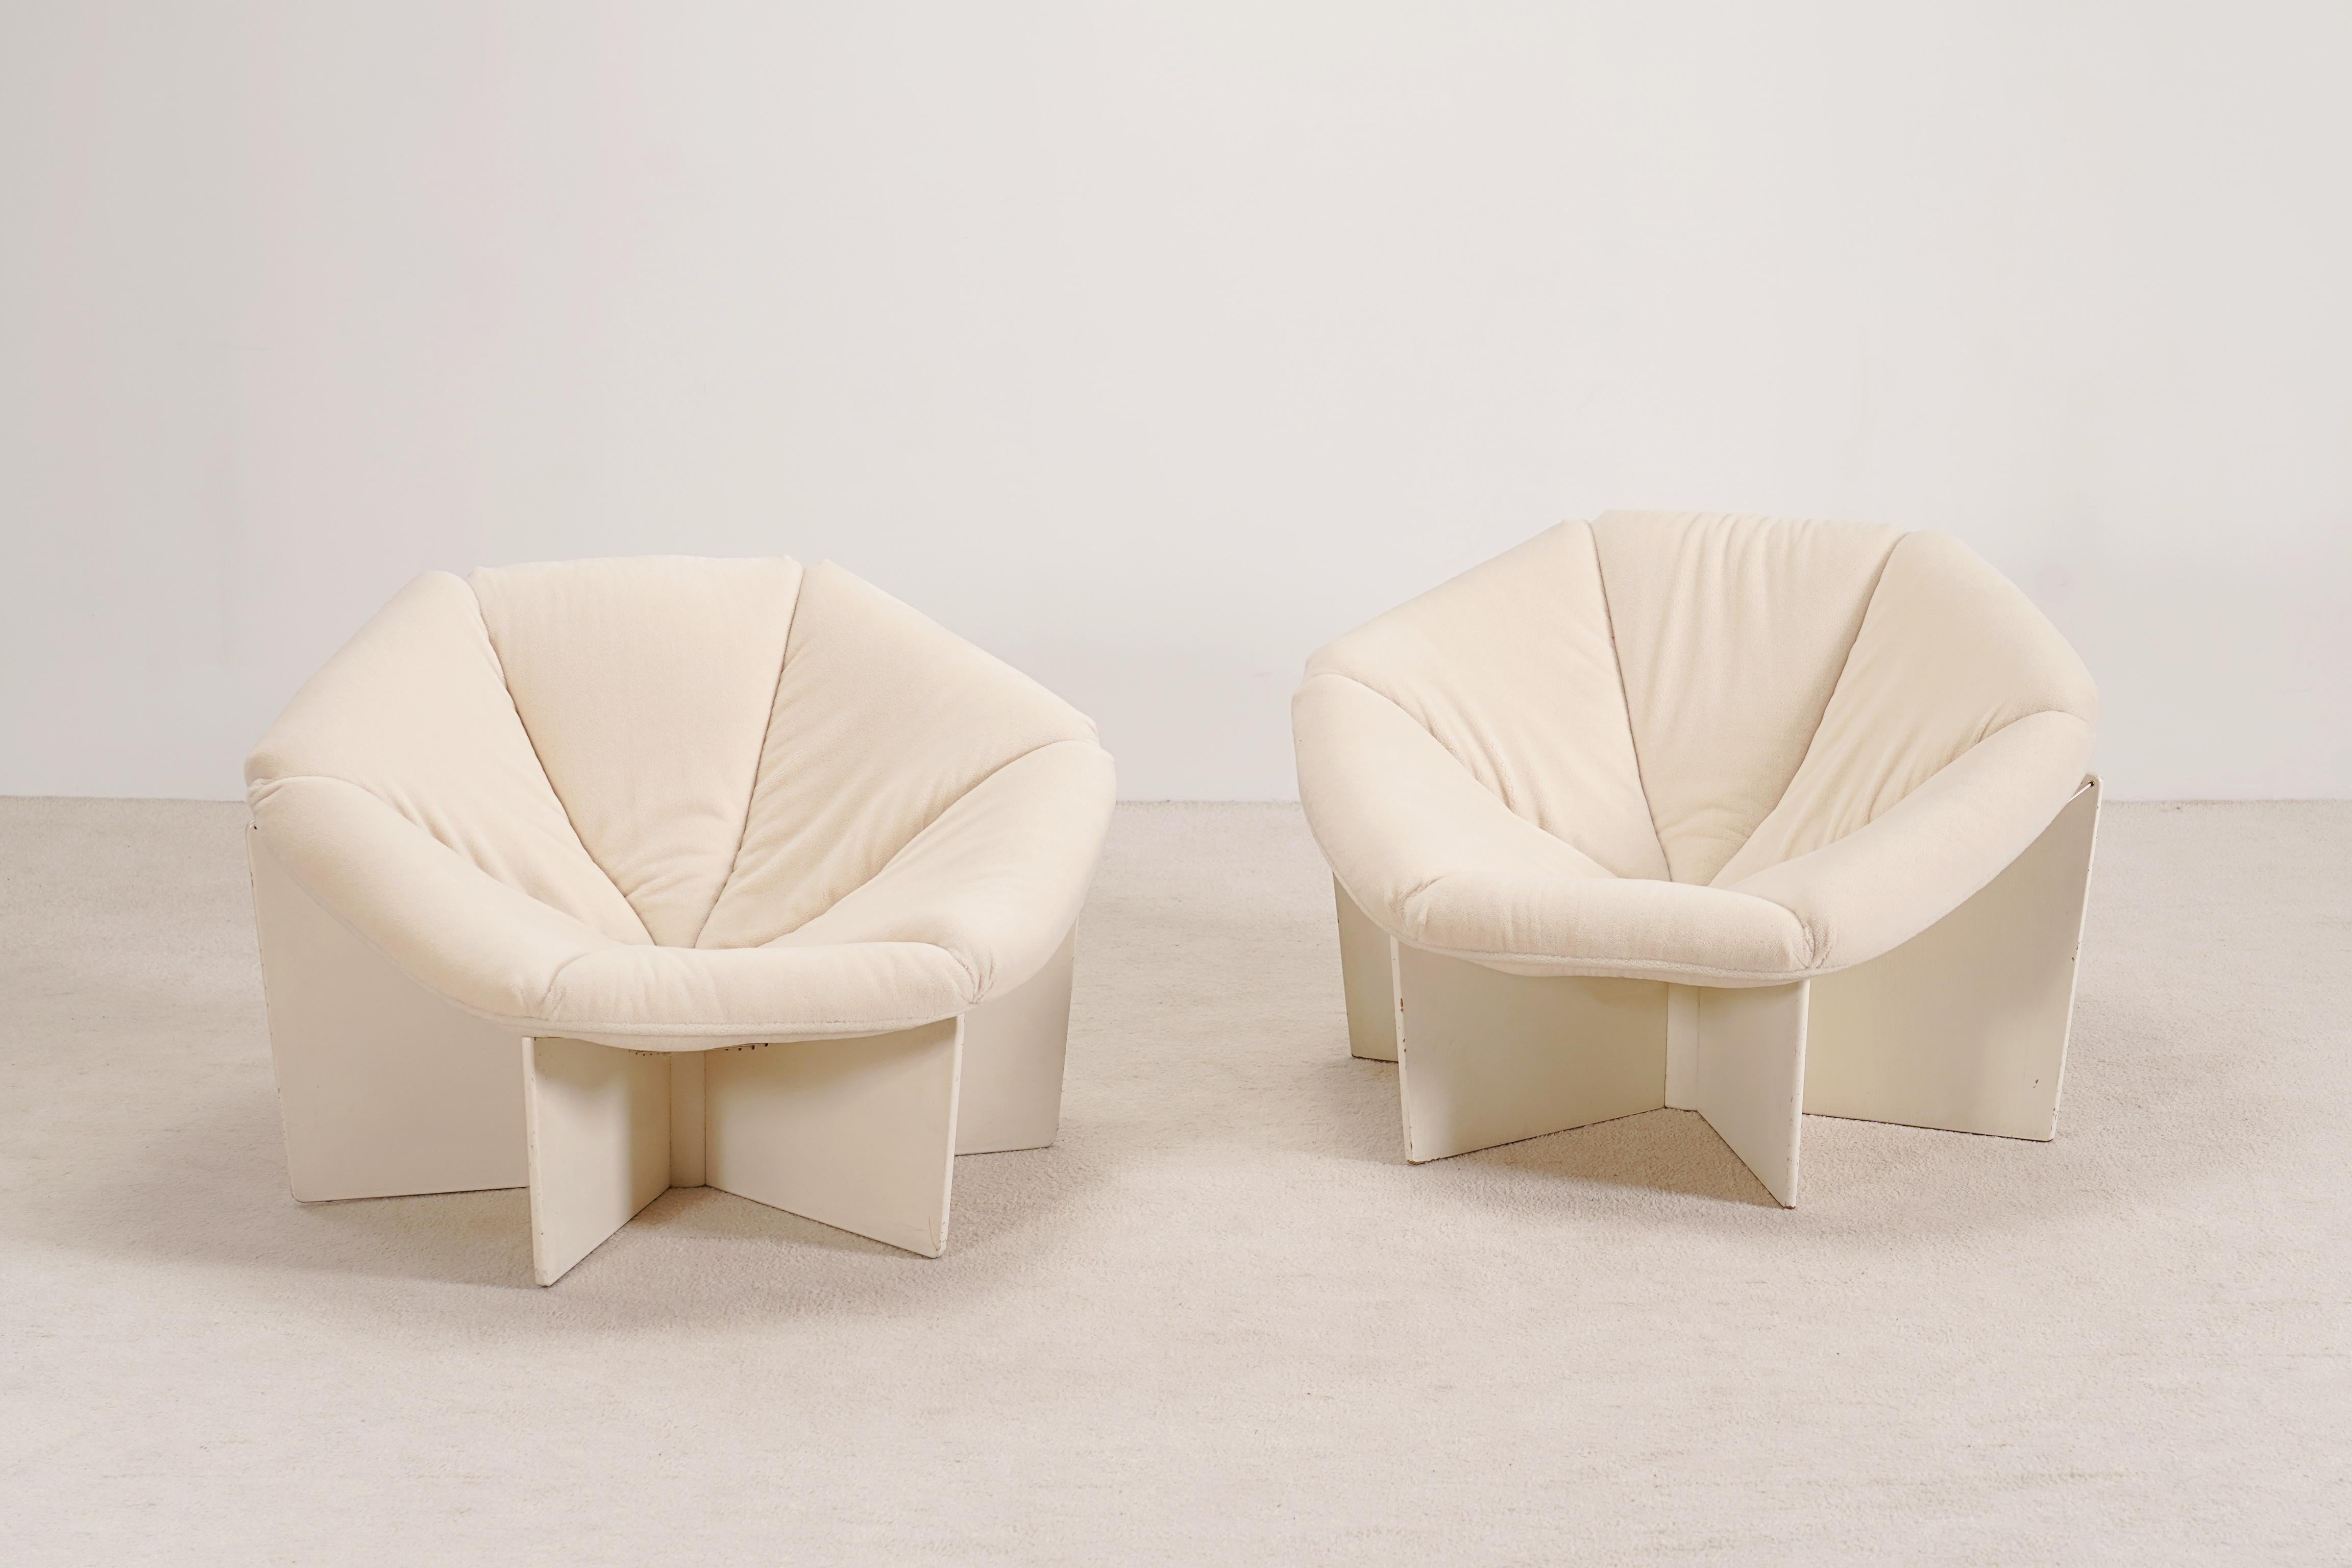 Exceptional and rare pair of lounge chairs model F678, also known as the Spider Lounge Chair designed by the French designer Pierre Paulin and manufactured by Artifort Furniture Company of the Netherlands, 1966.

The unique hexagonal shape of the